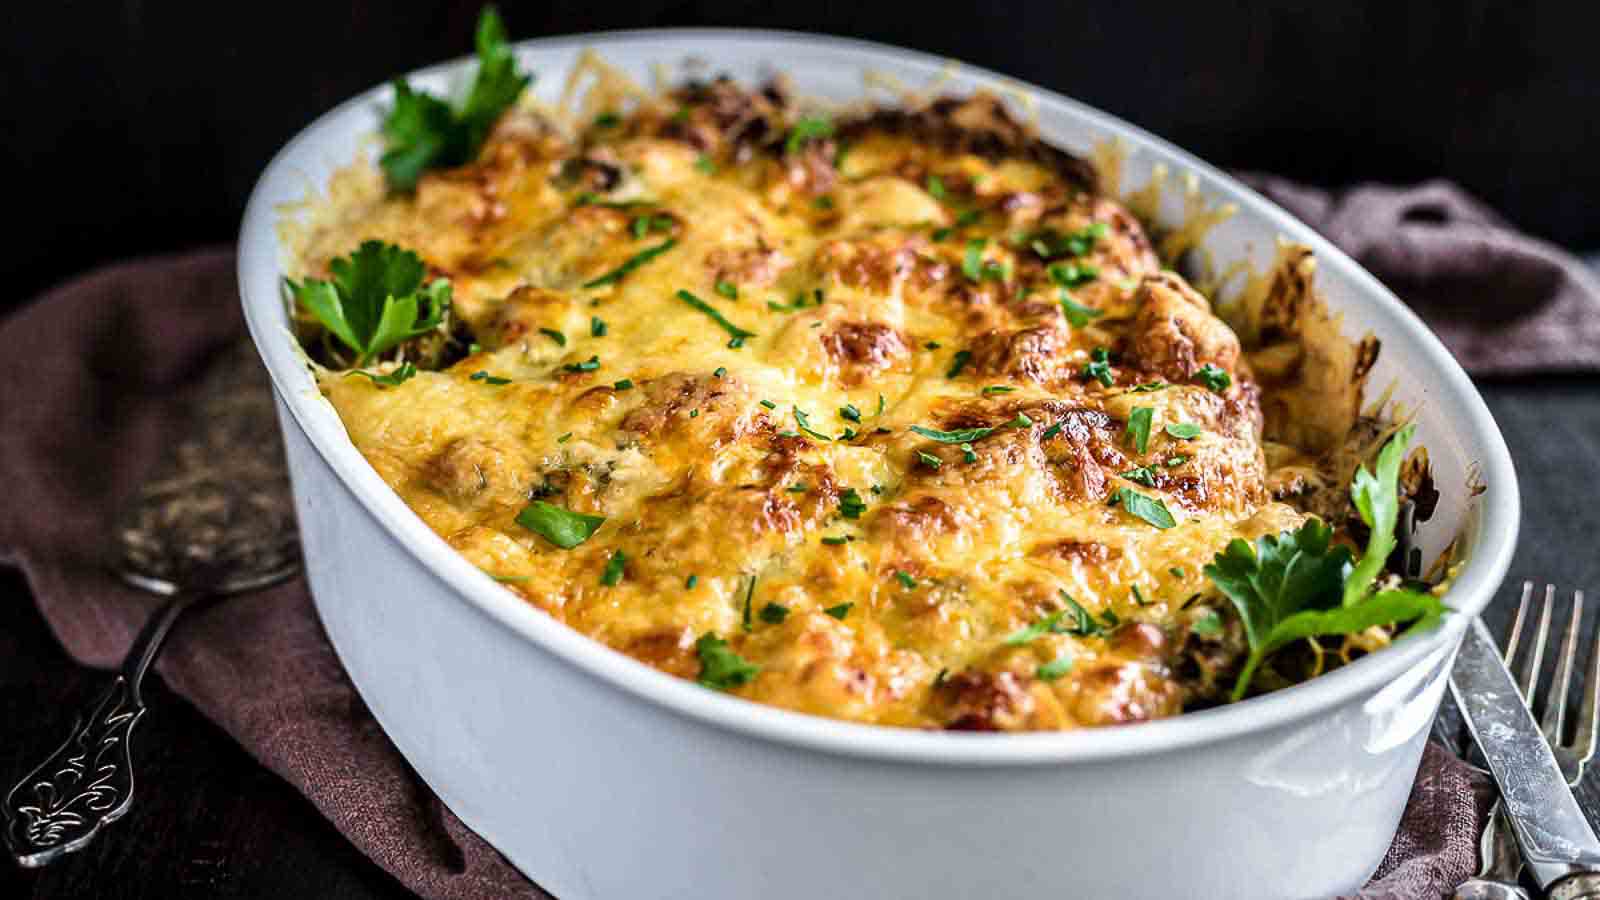 Chicken casserole with baked cheese inside a white dish.